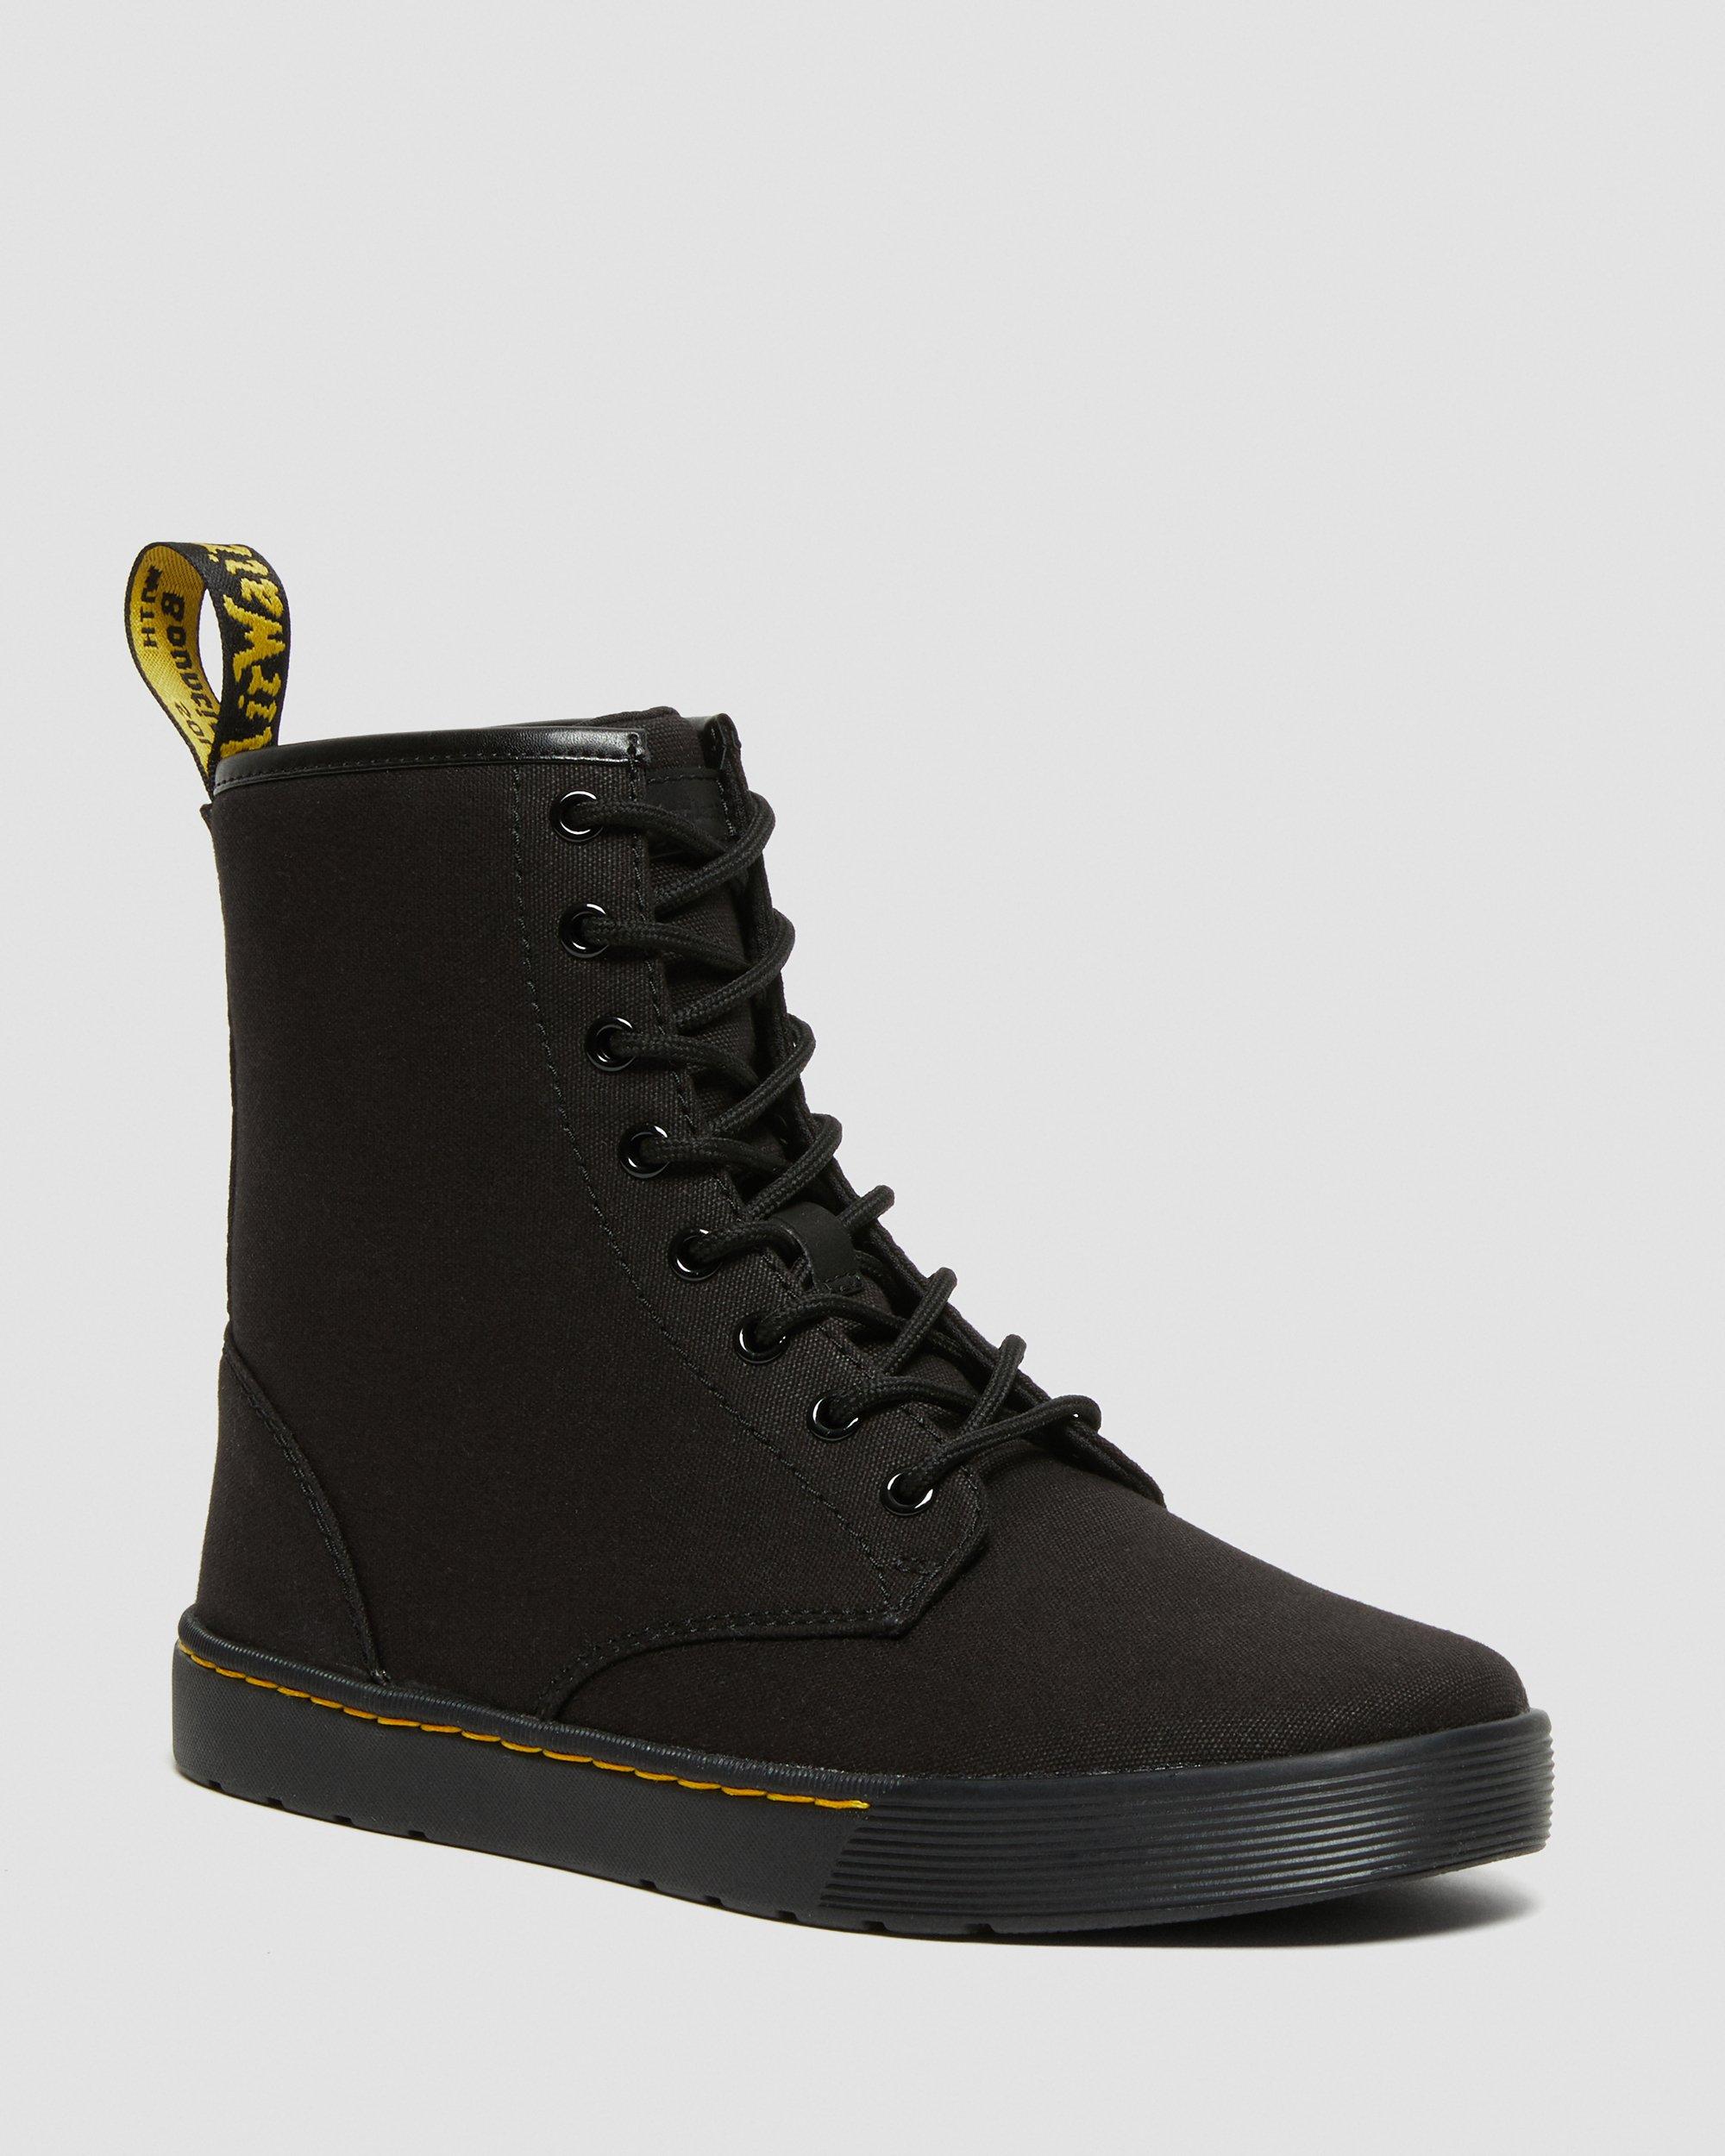 Canvas Shoes & Boots | Sneakers | Dr. Martens